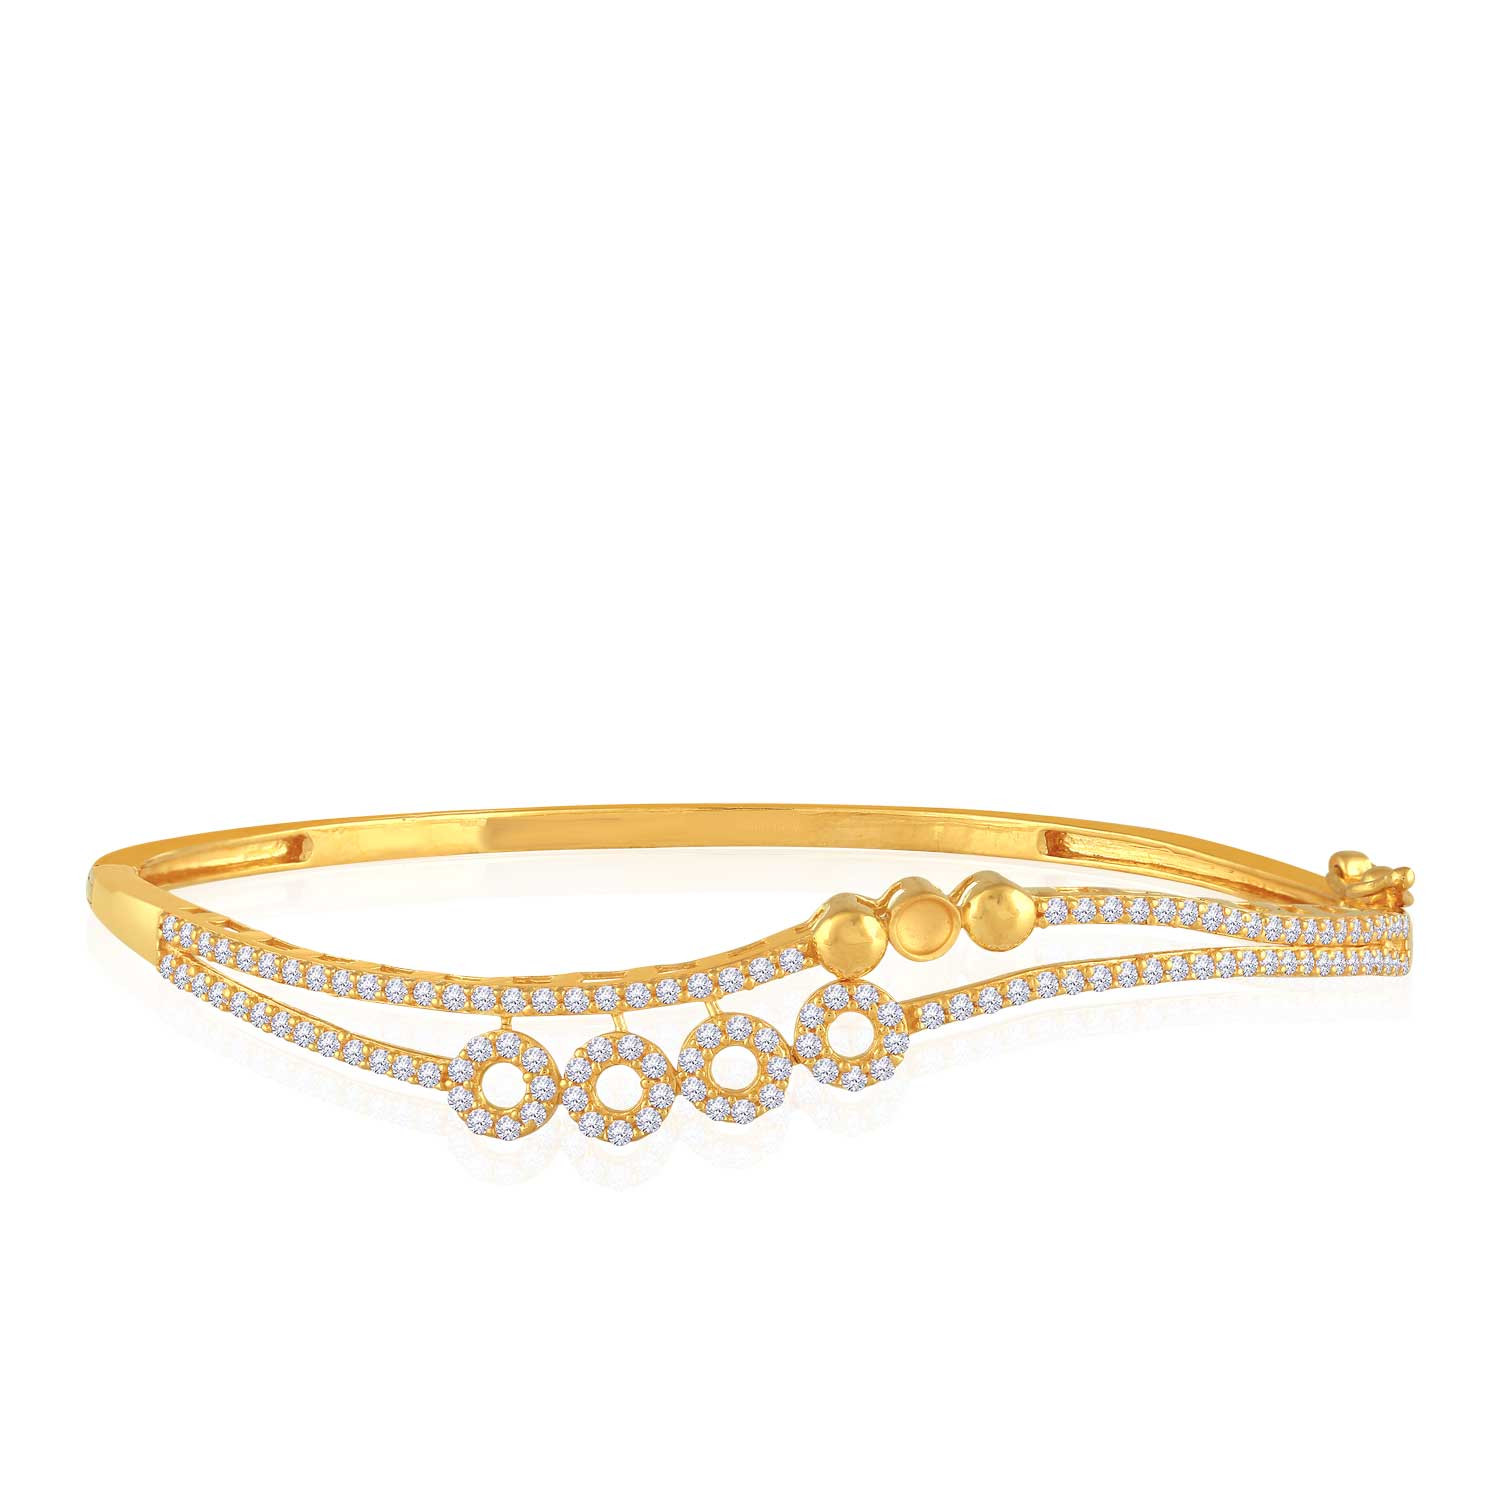 22K Gold Cable-Link Bracelet w/ 3 Detailed Ball Beads – Virani Jewelers